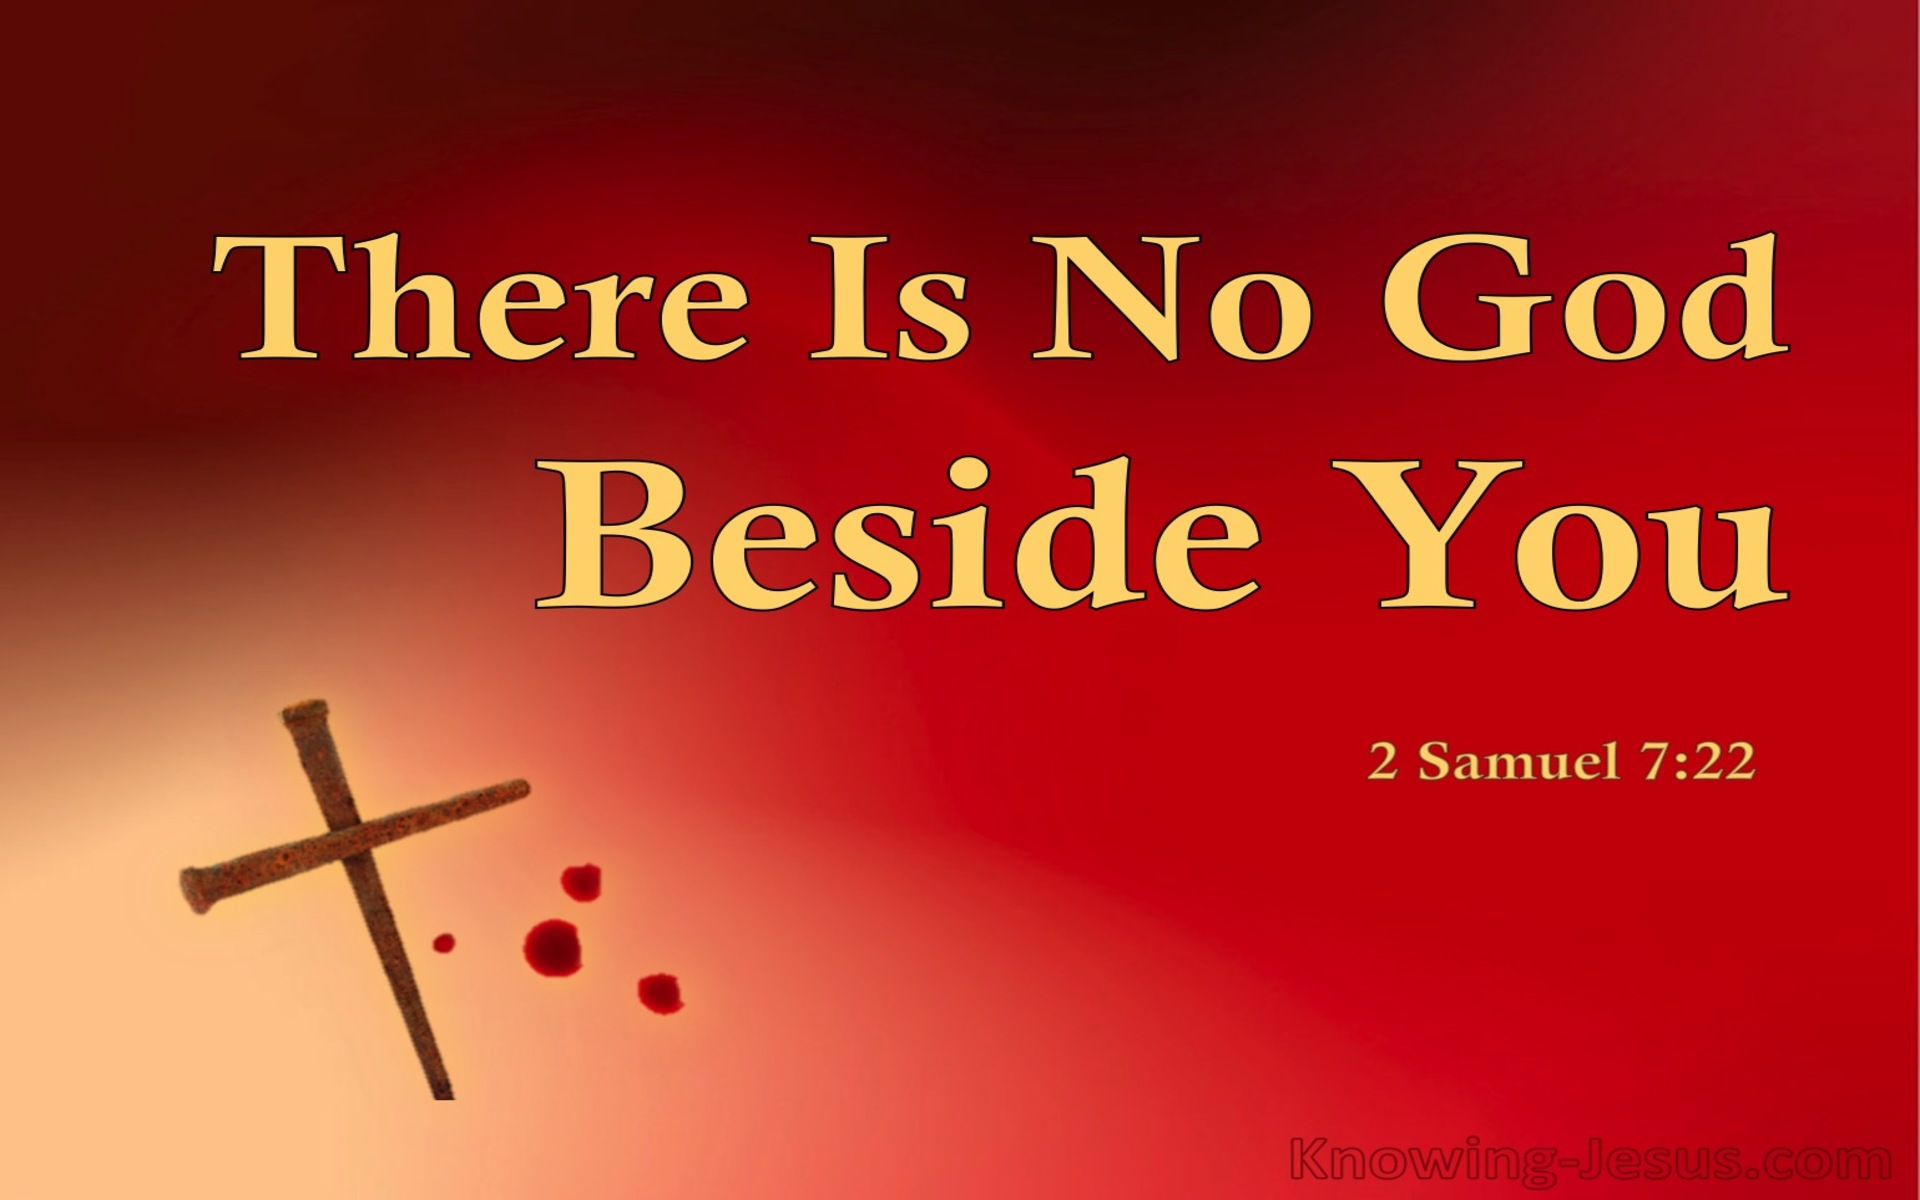 2 Samuel 7:22 There Is No God Beside You (red)